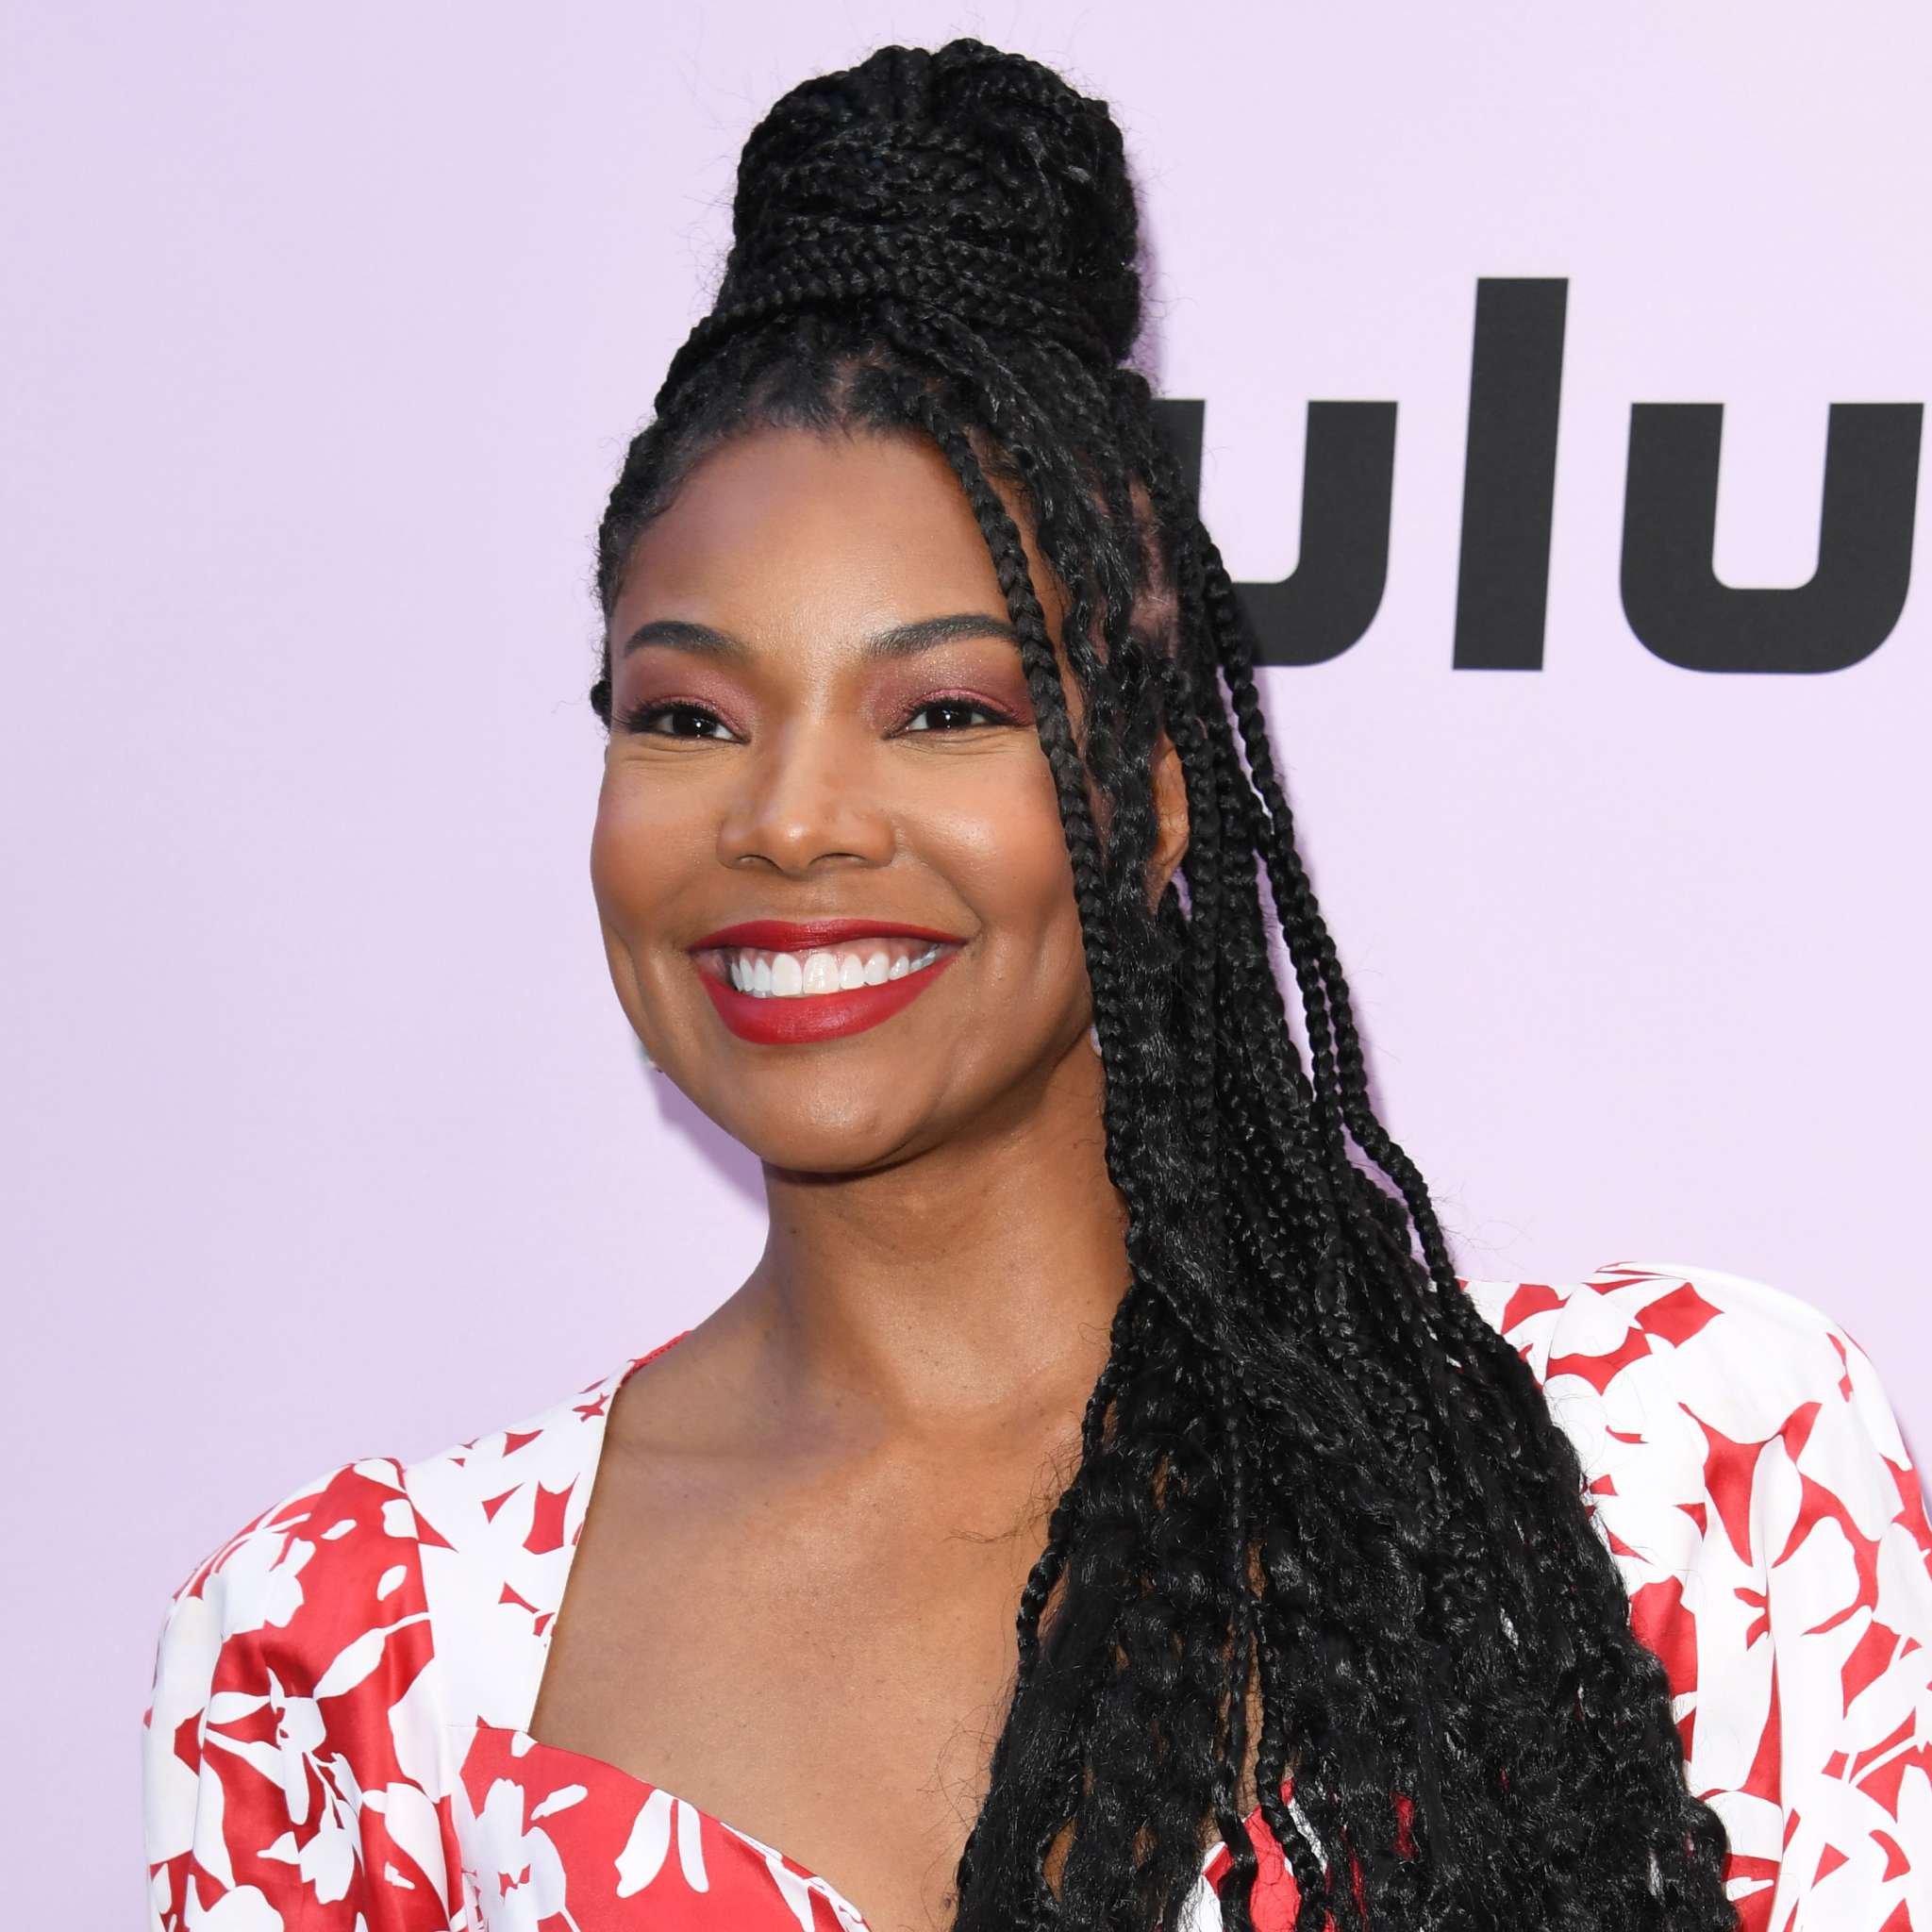 gabrielle-union-is-praising-simone-ashley-she-is-slaying-in-every-episode